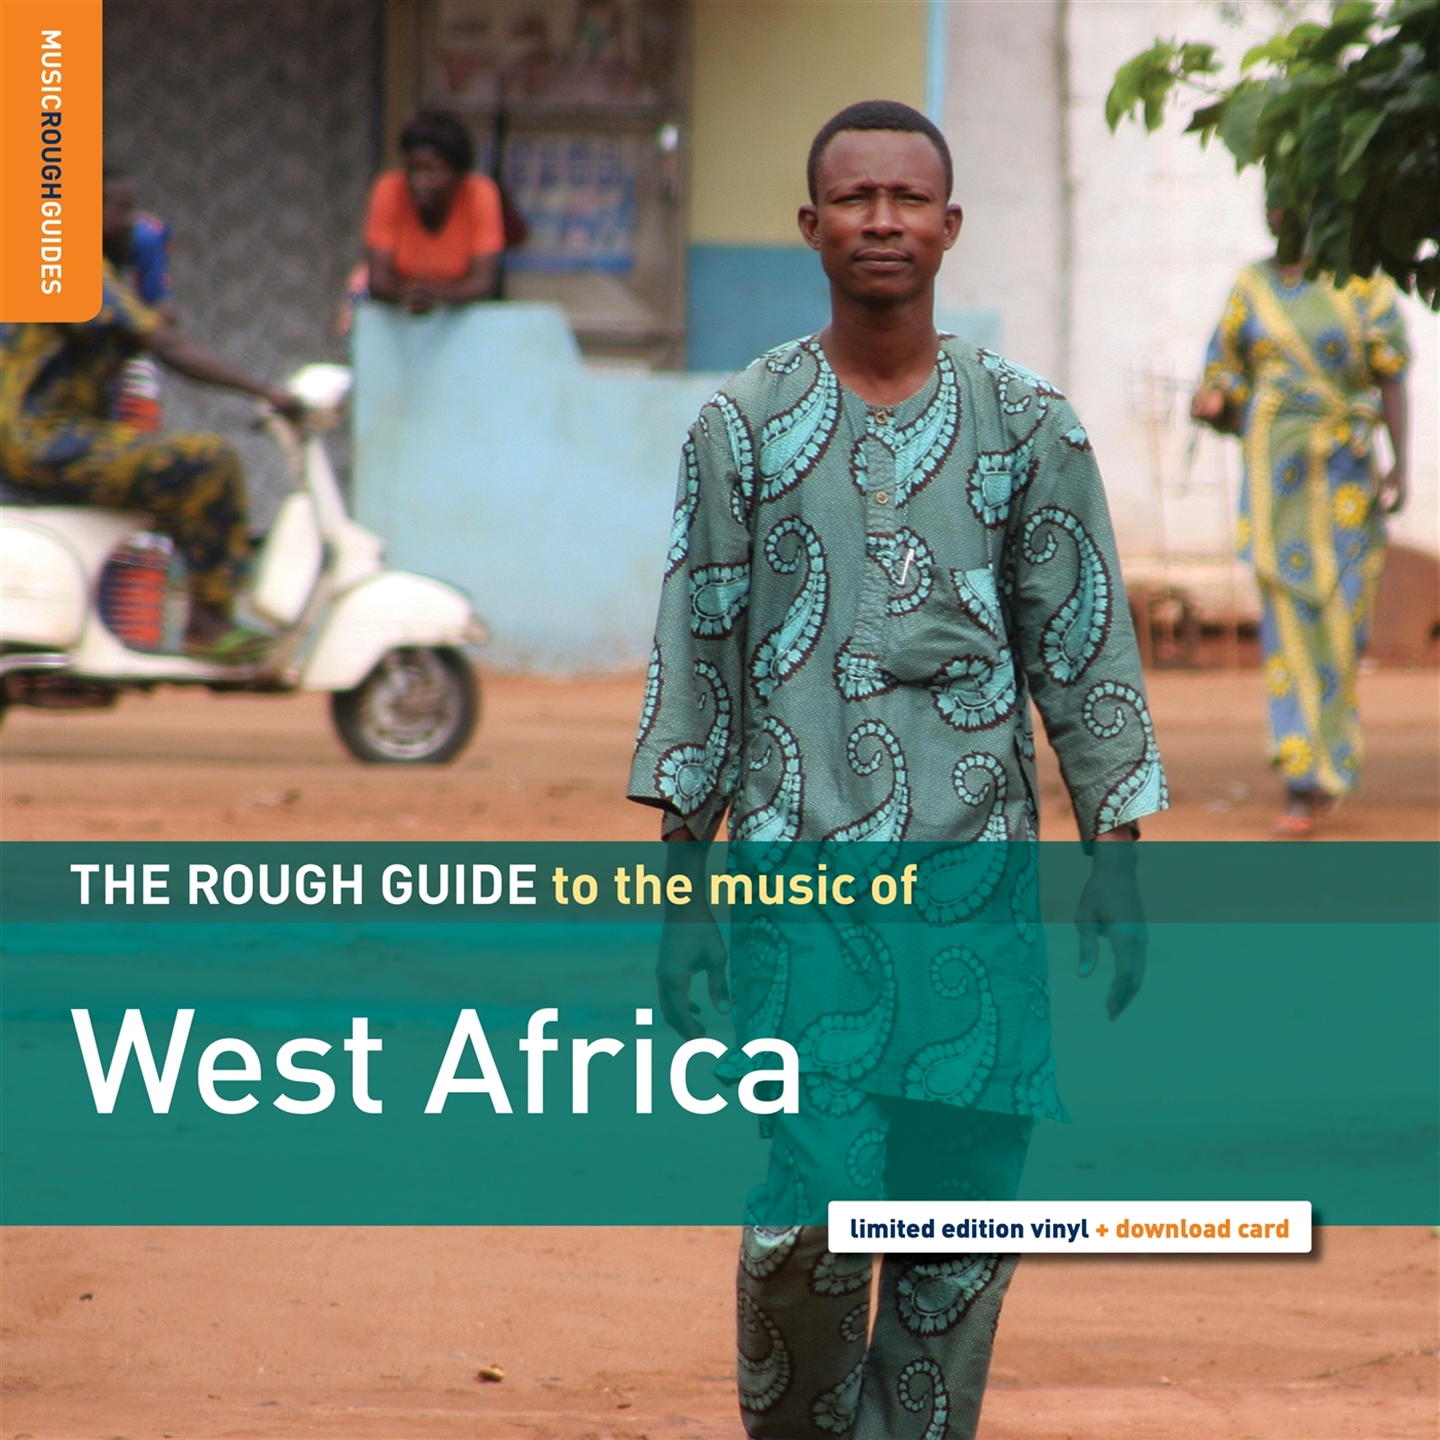 THE ROUGH GUIDE TO THE WEST AFRICA [LP]